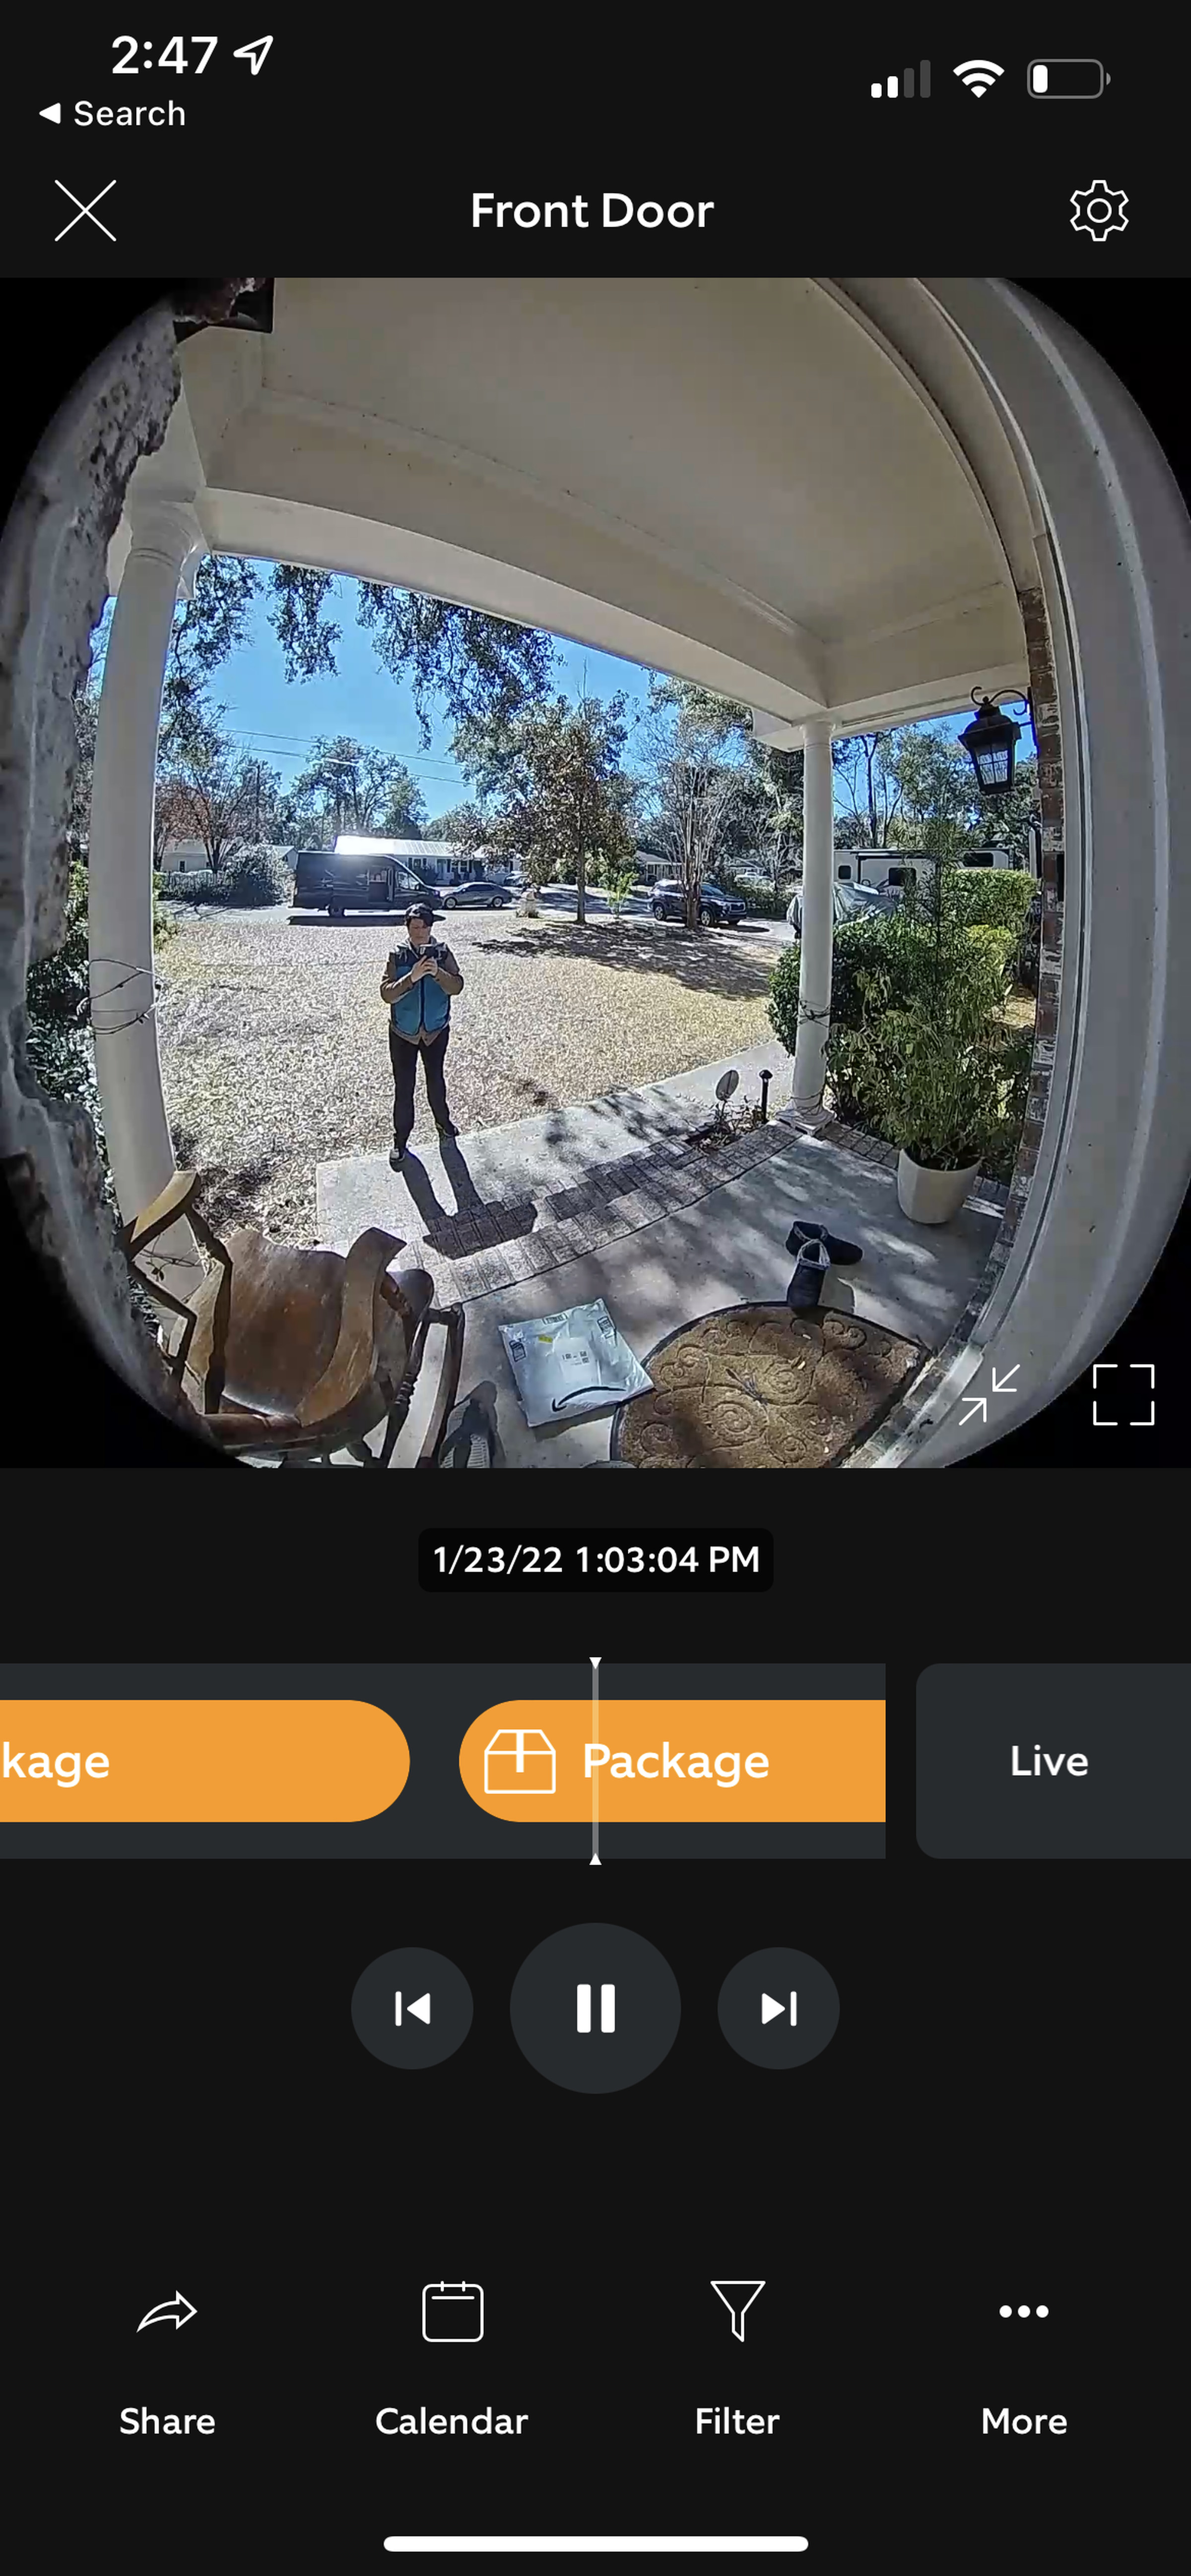 The Ring Video Doorbell Pro 2 has a 1:1 aspect ratio.